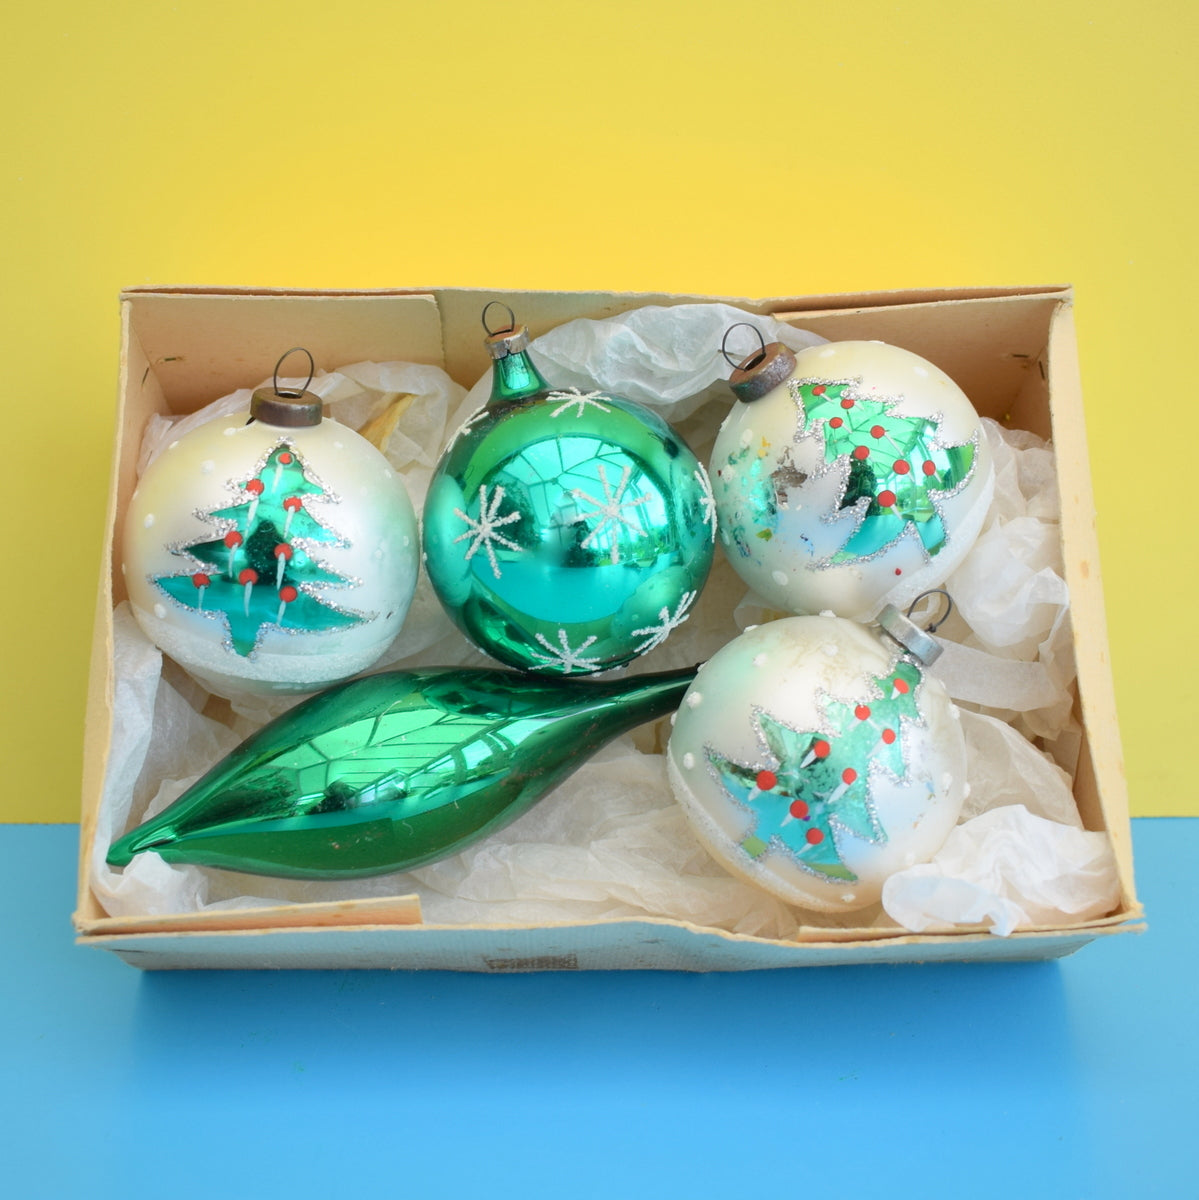 Vintage 1970s Large Medium Glass Christmas Baubles / Decorations - Emerald Green / Trees